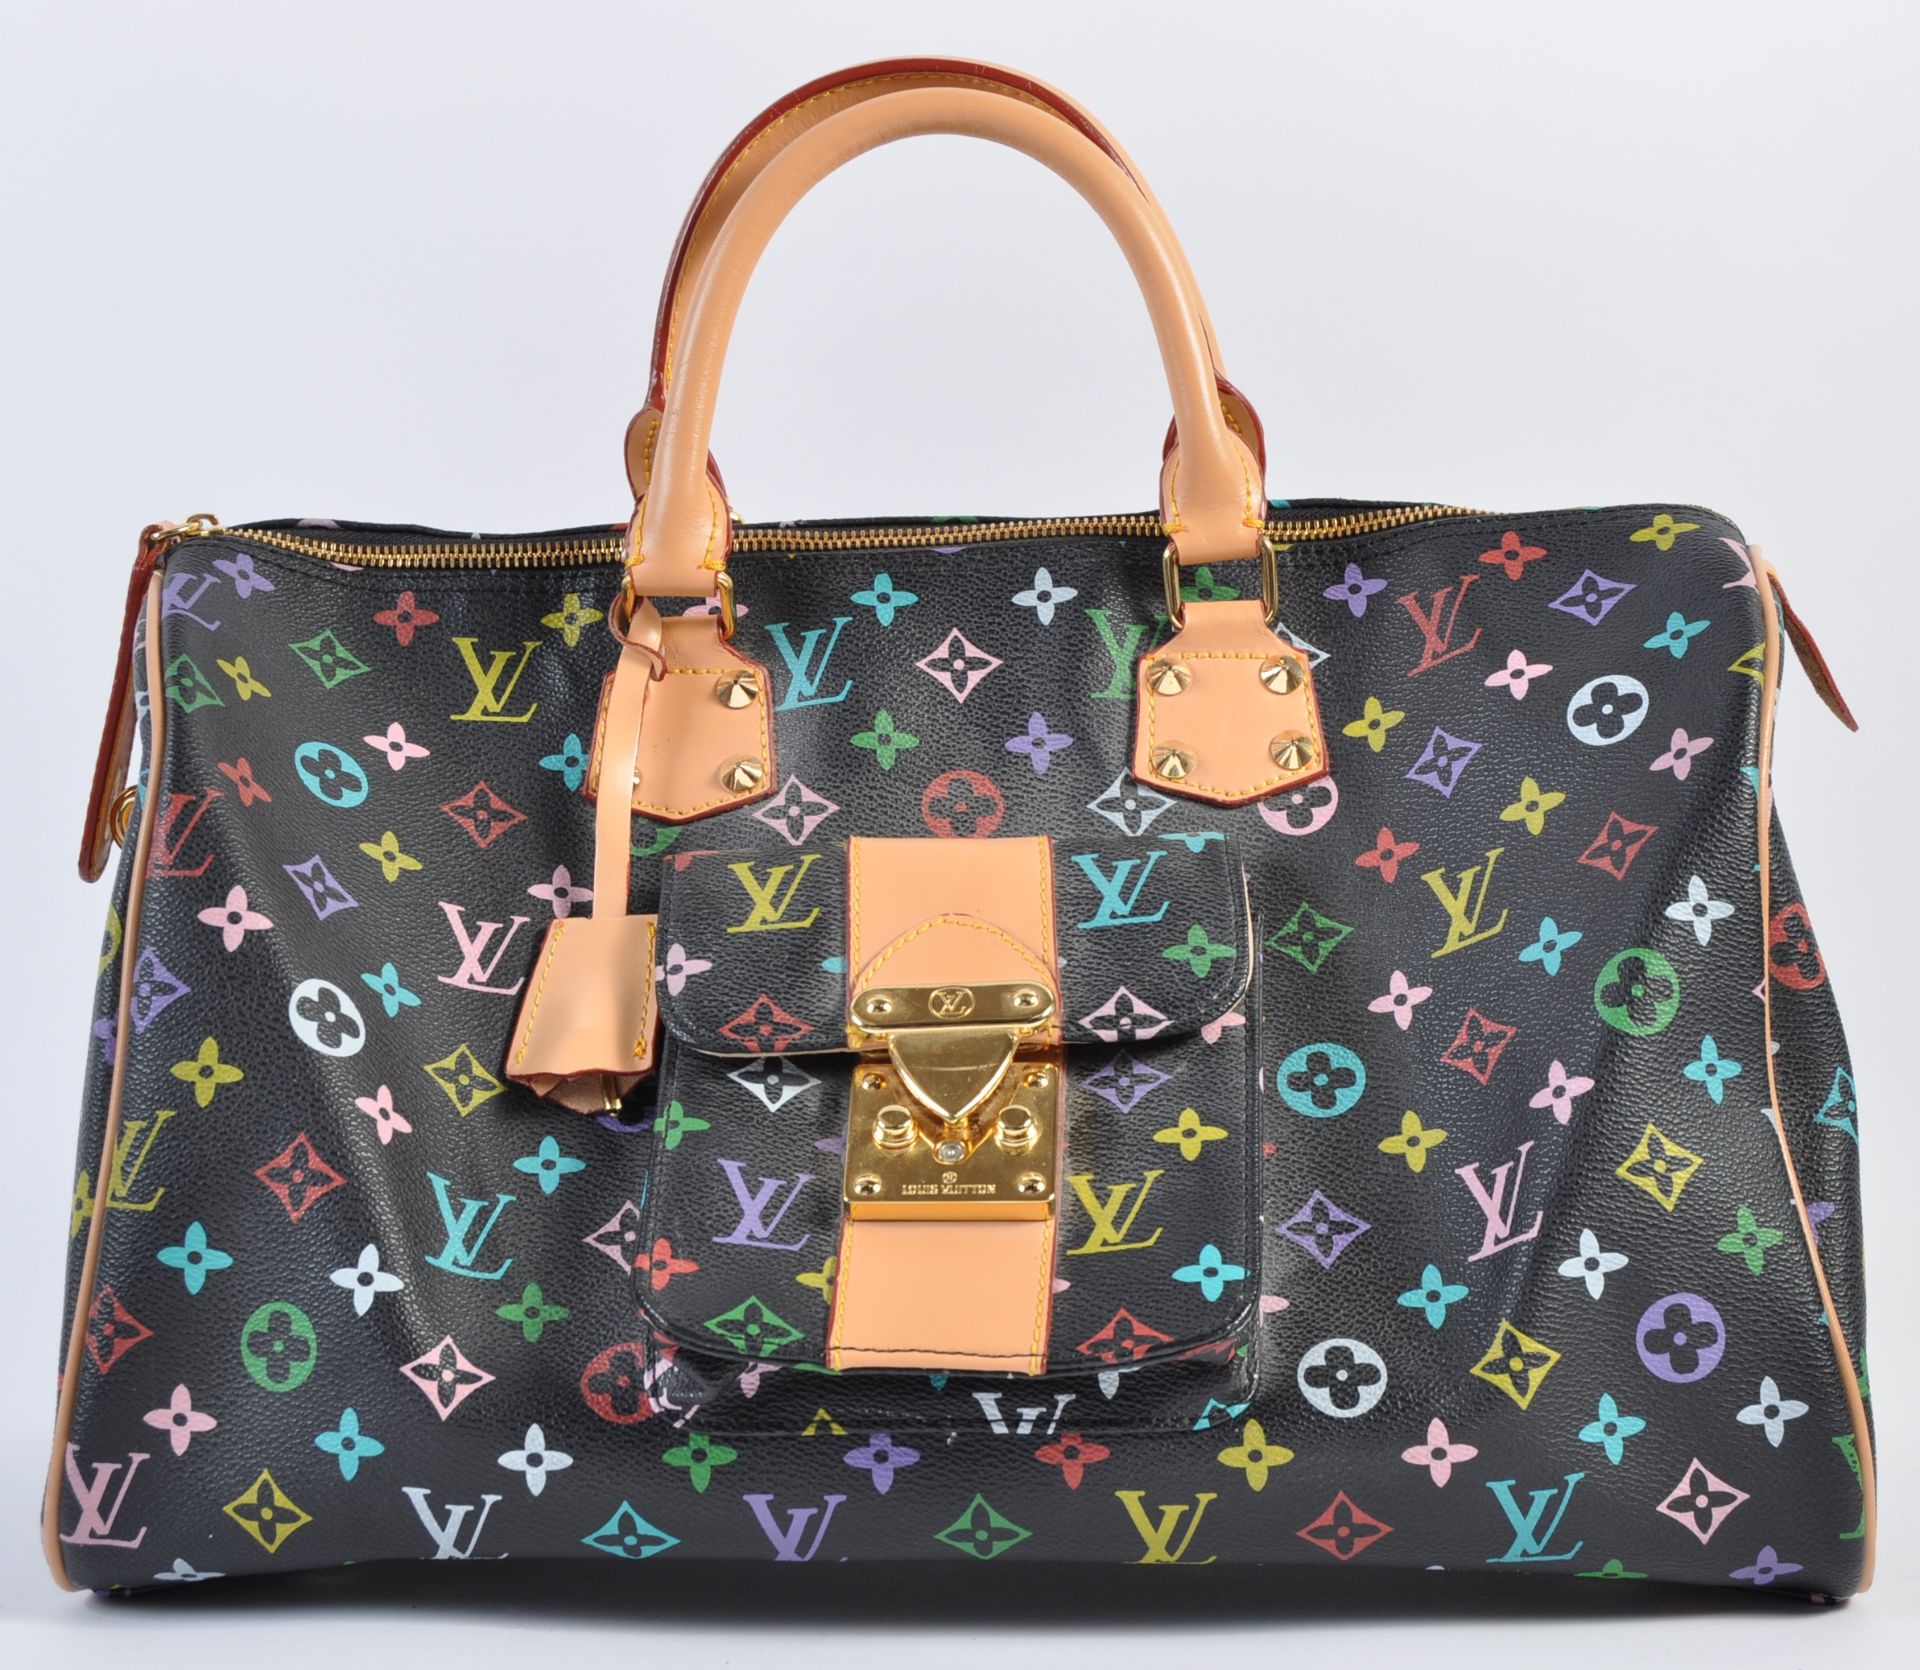 ANGELA GRANT COLLECTION - BEAUTIFUL LOUIS VUITTON